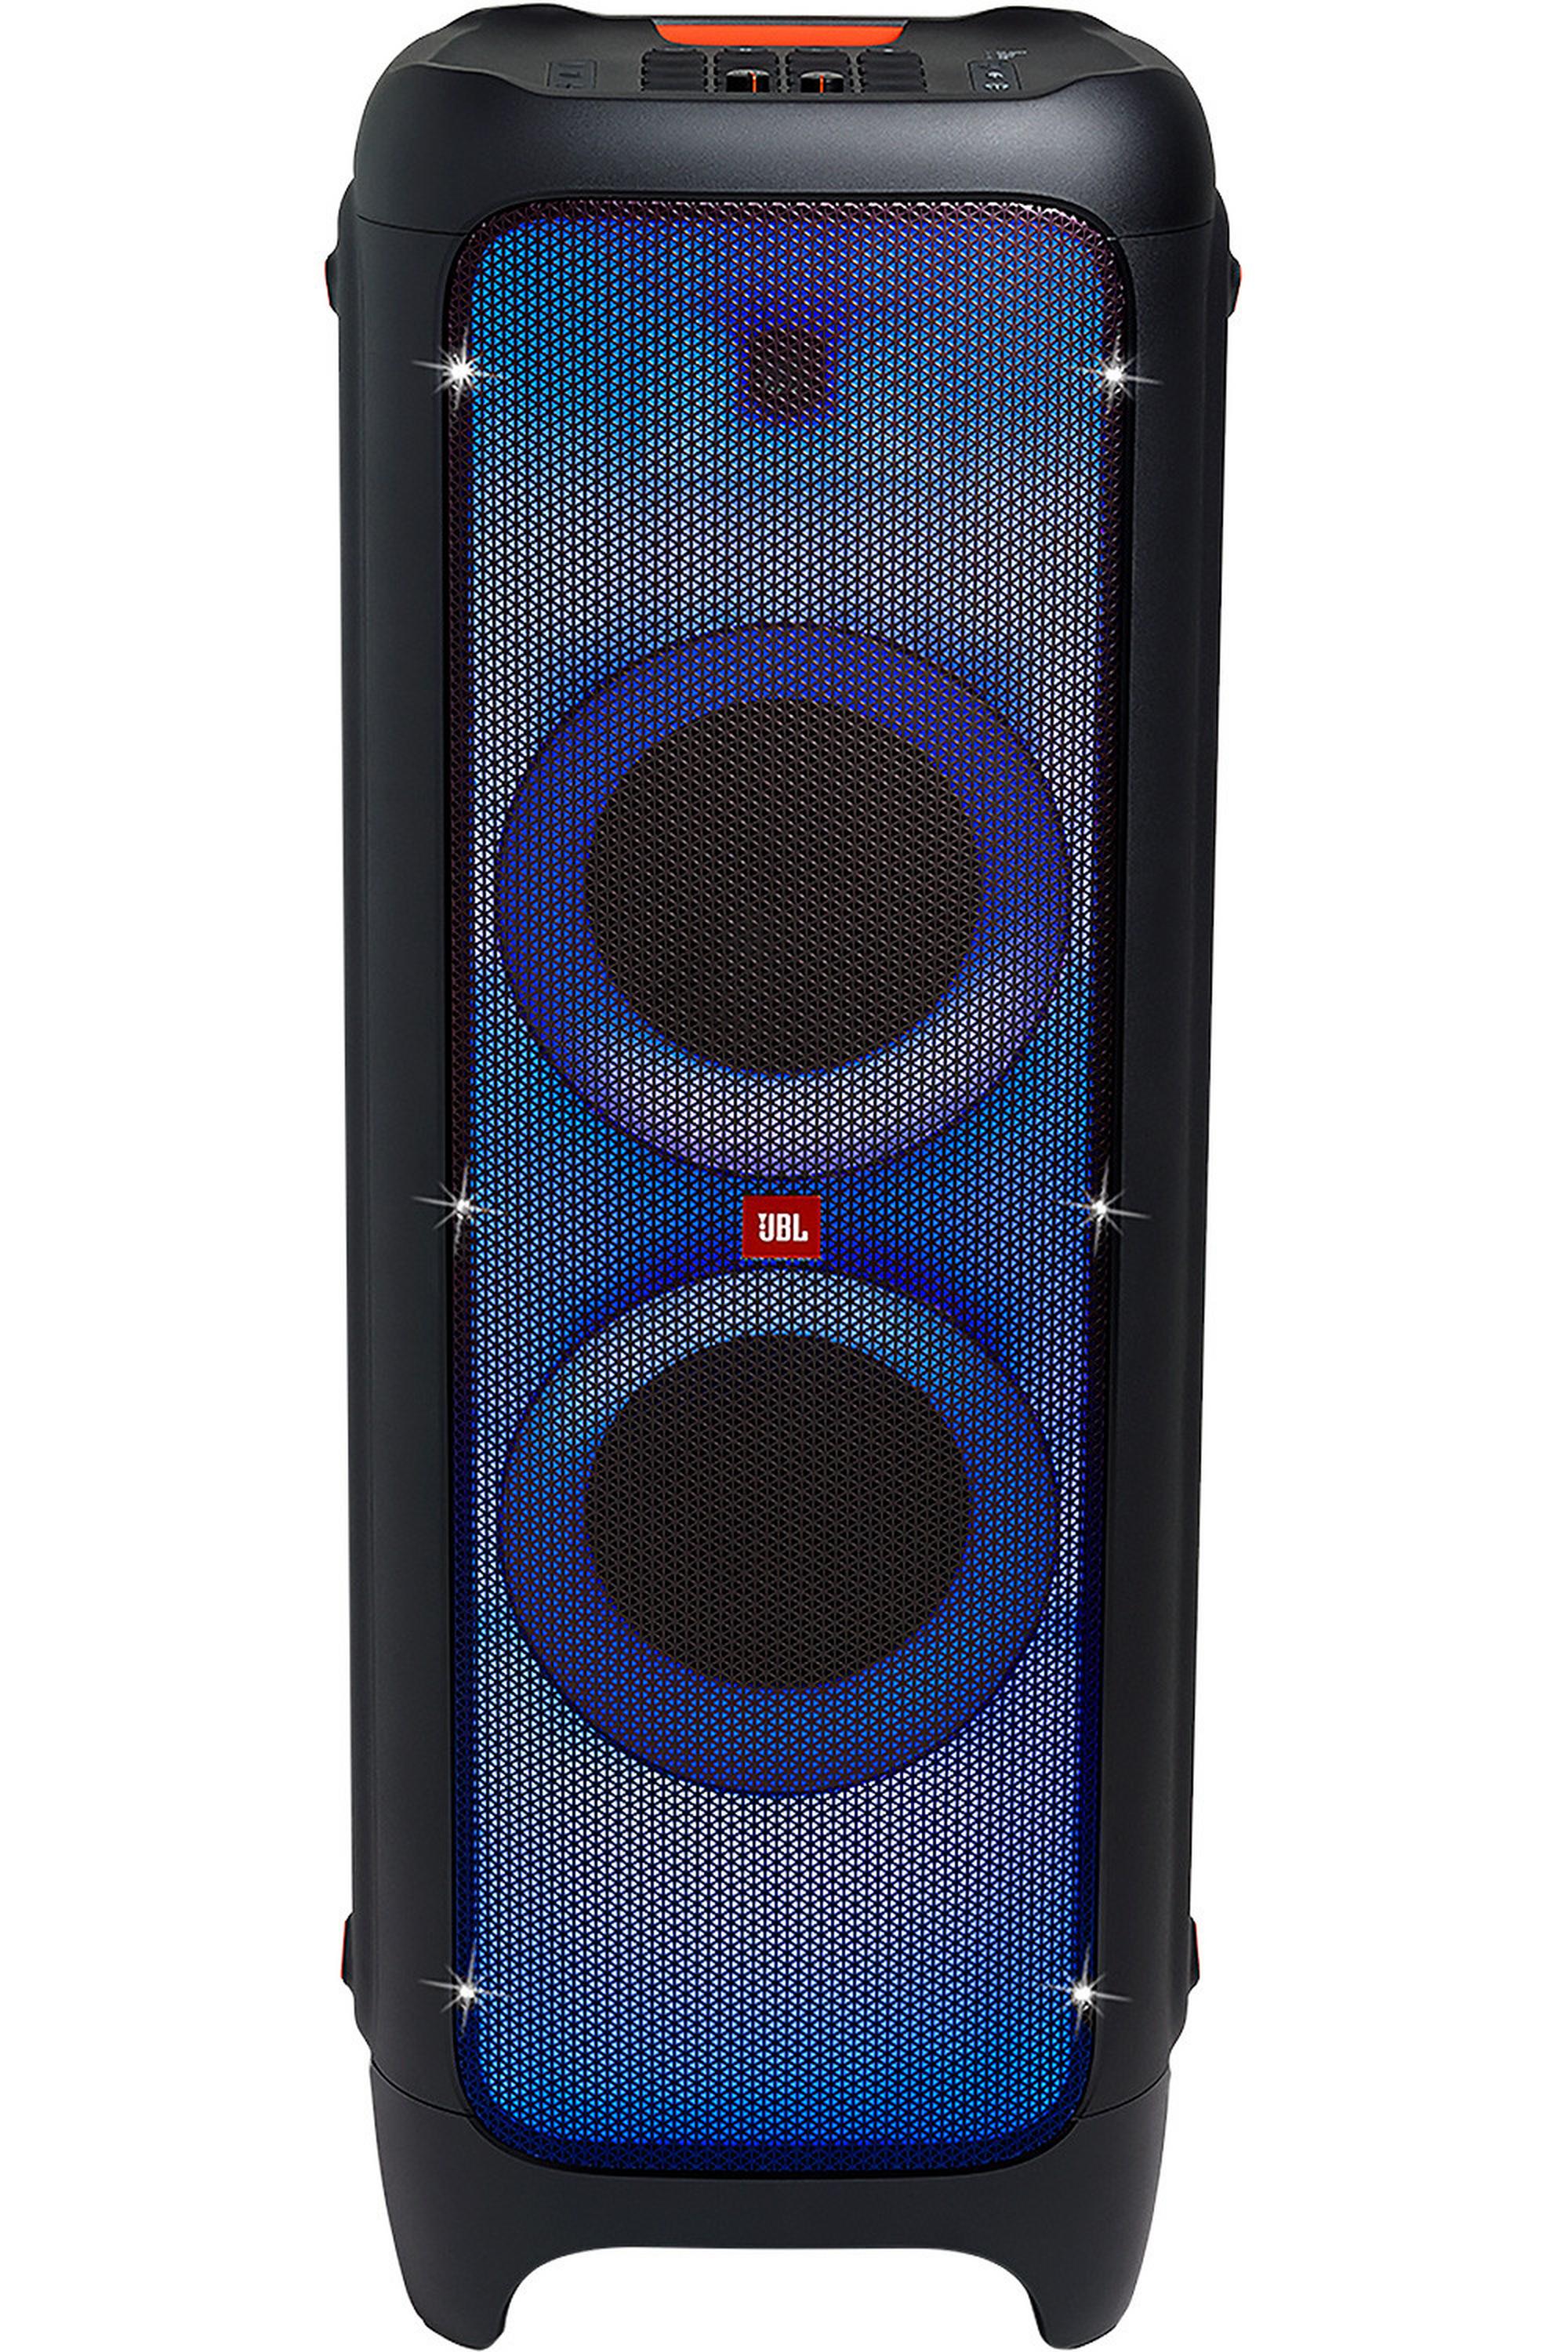 Rent to Own JBL JBL 1100W Bluetooth Party Speaker at Aaron's today!